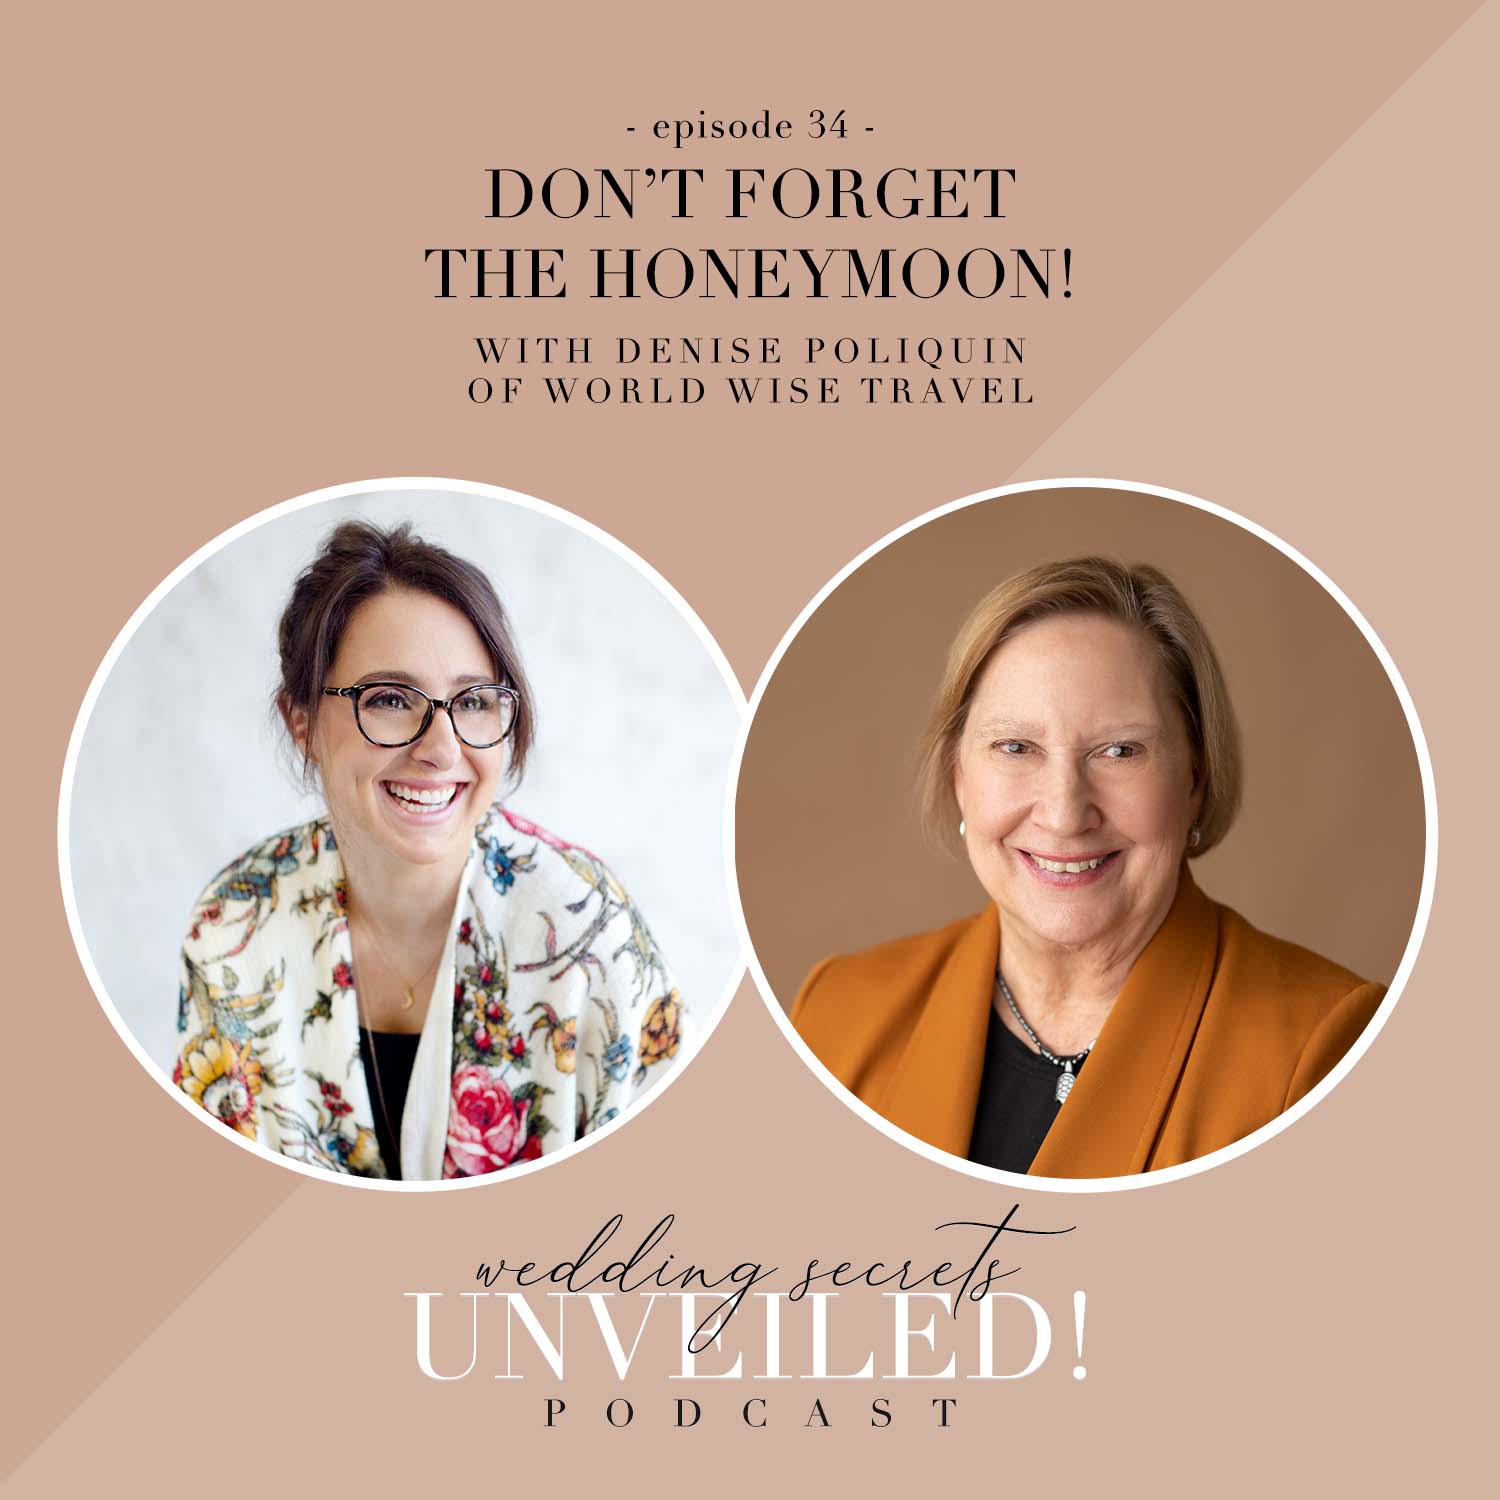 Don't Forget the Honeymoon: Honeymoon planning tips from Denise Poliquin of World Wise Travel  on the Wedding Secrets Unveiled! Podcast